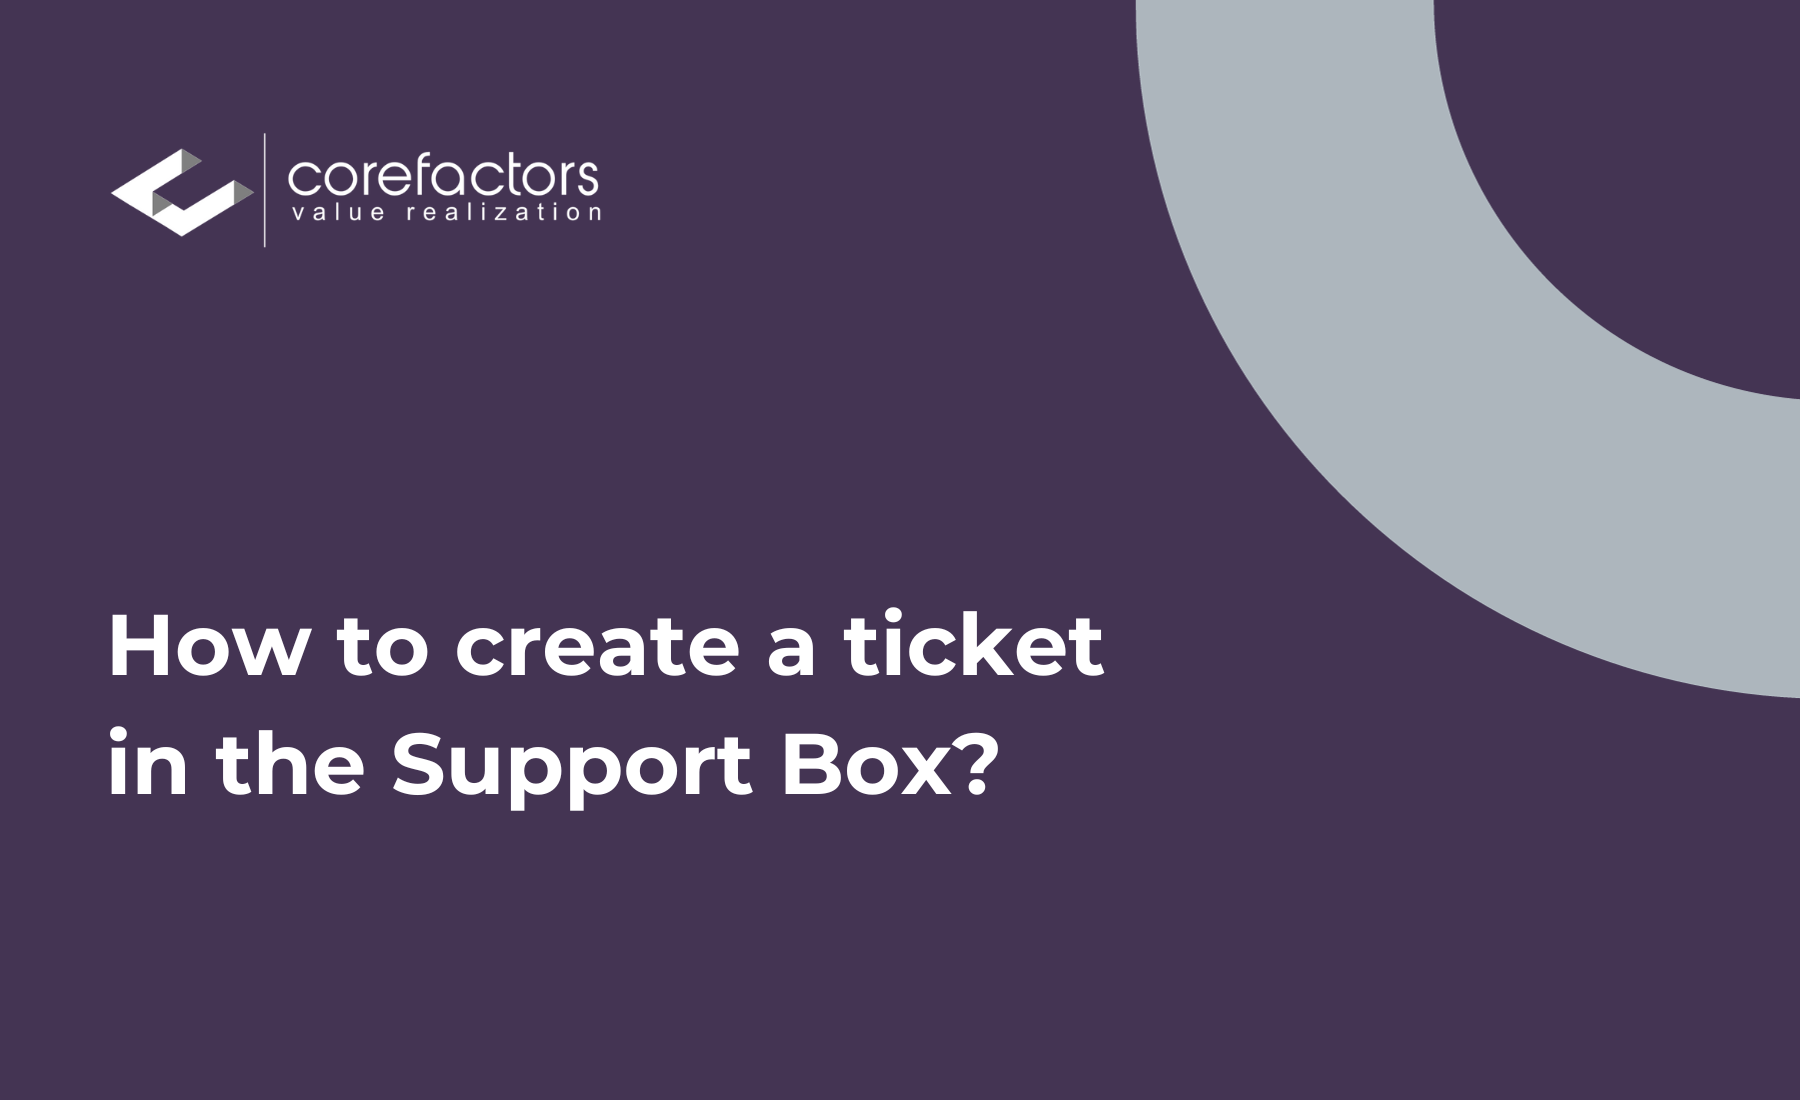 How to create a ticket in Corefactors CRM?